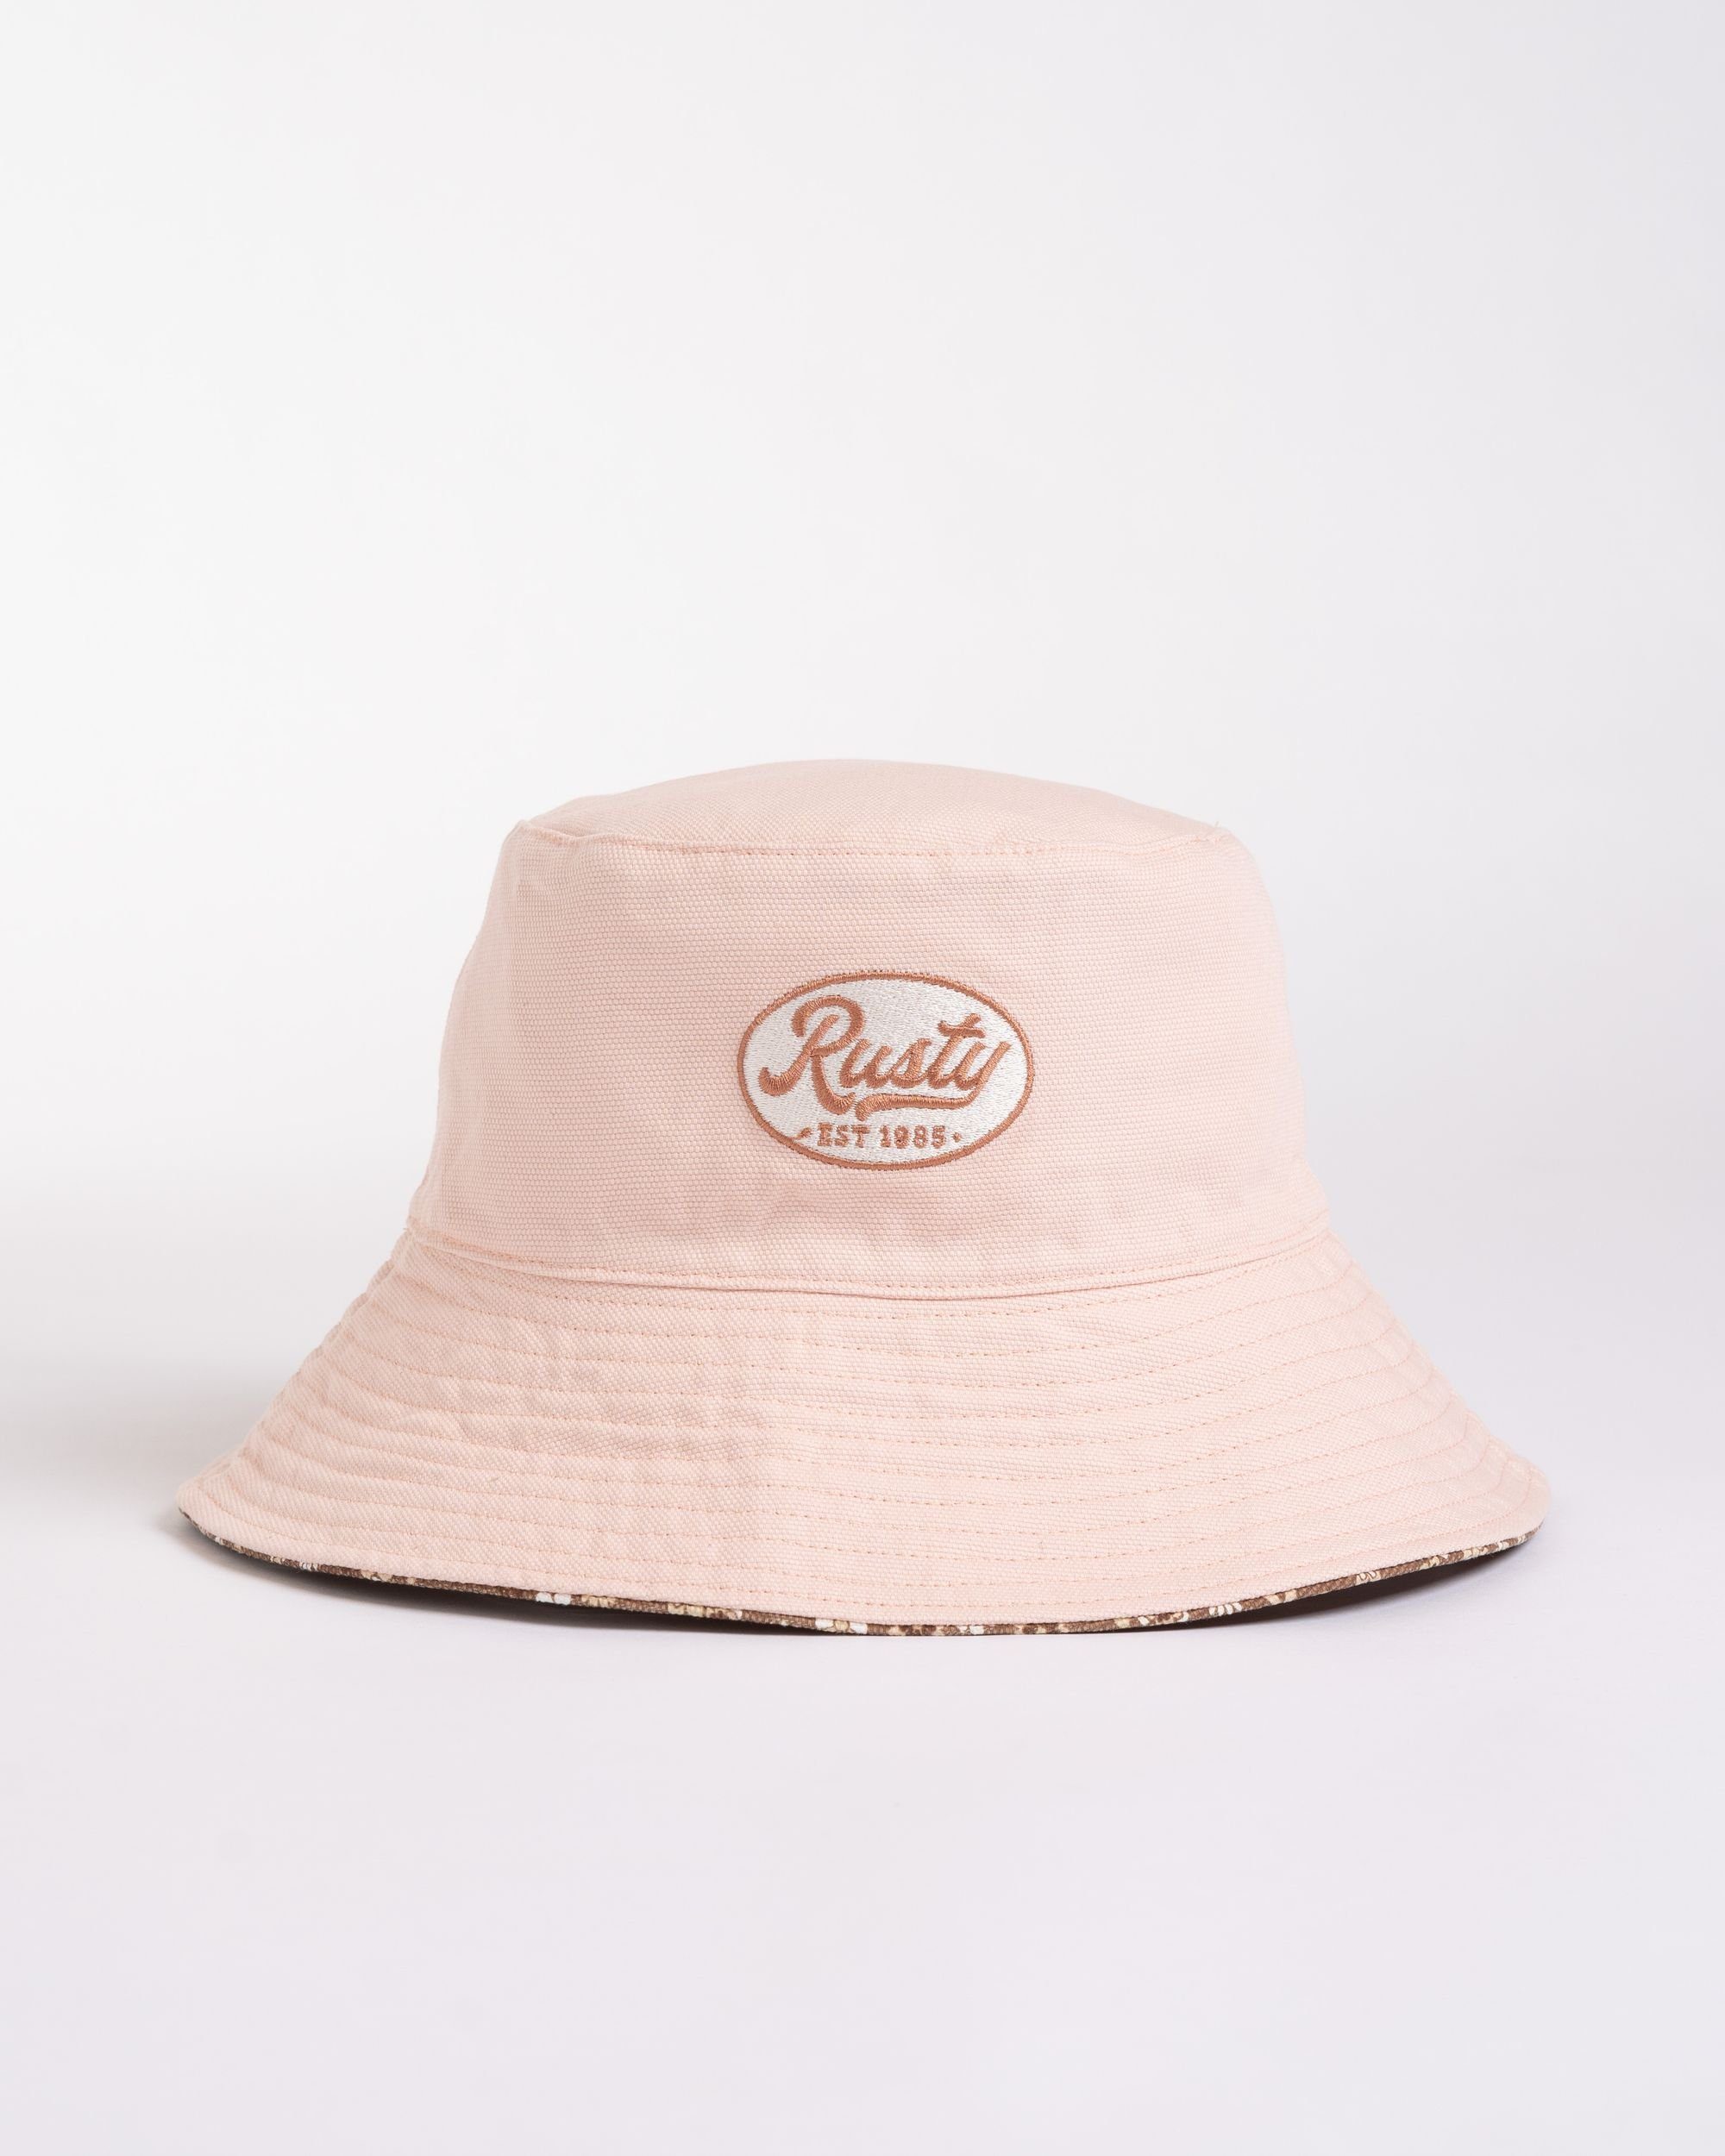 Schlapphut REVERSIBLE TIME HAT Rusty BUCKET VACAY Pink Vintage